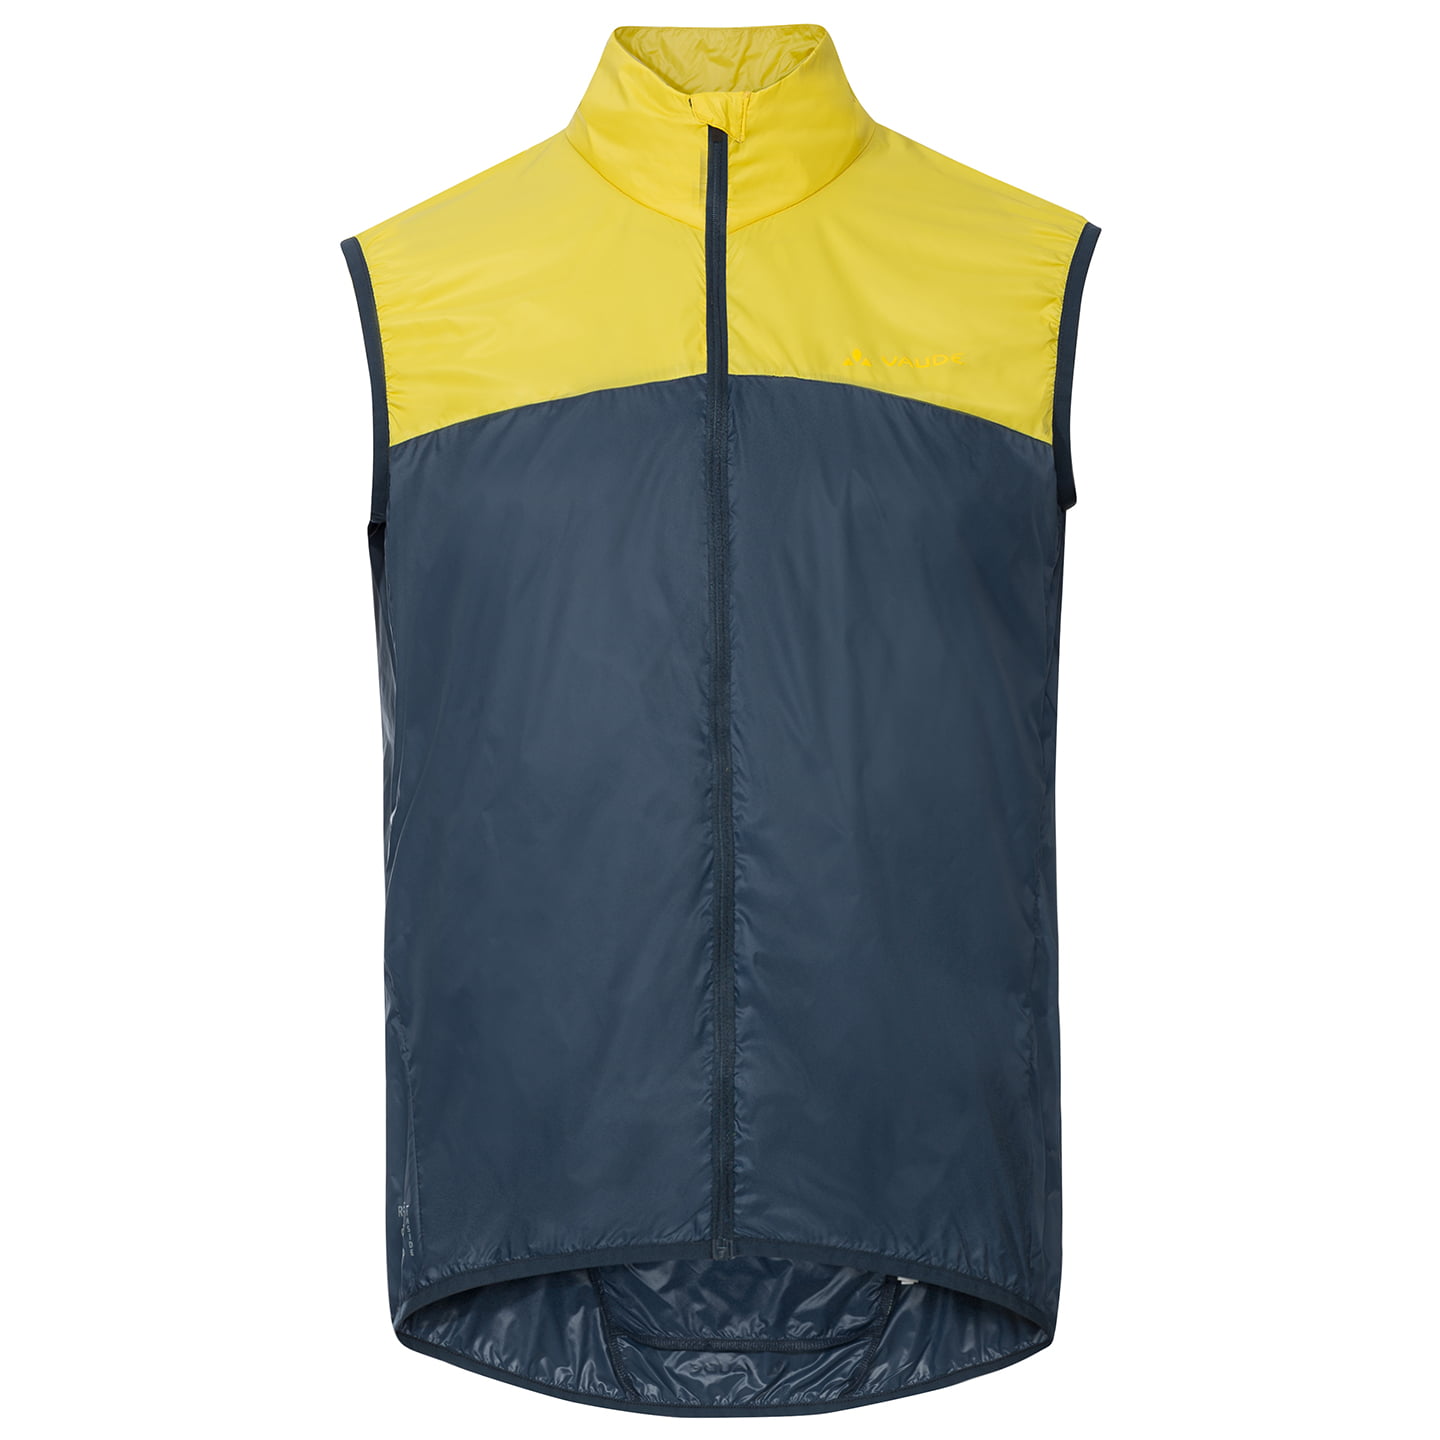 VAUDE Matera Air Wind Vest, for men, size M, Cycling vest, Cycle clothing